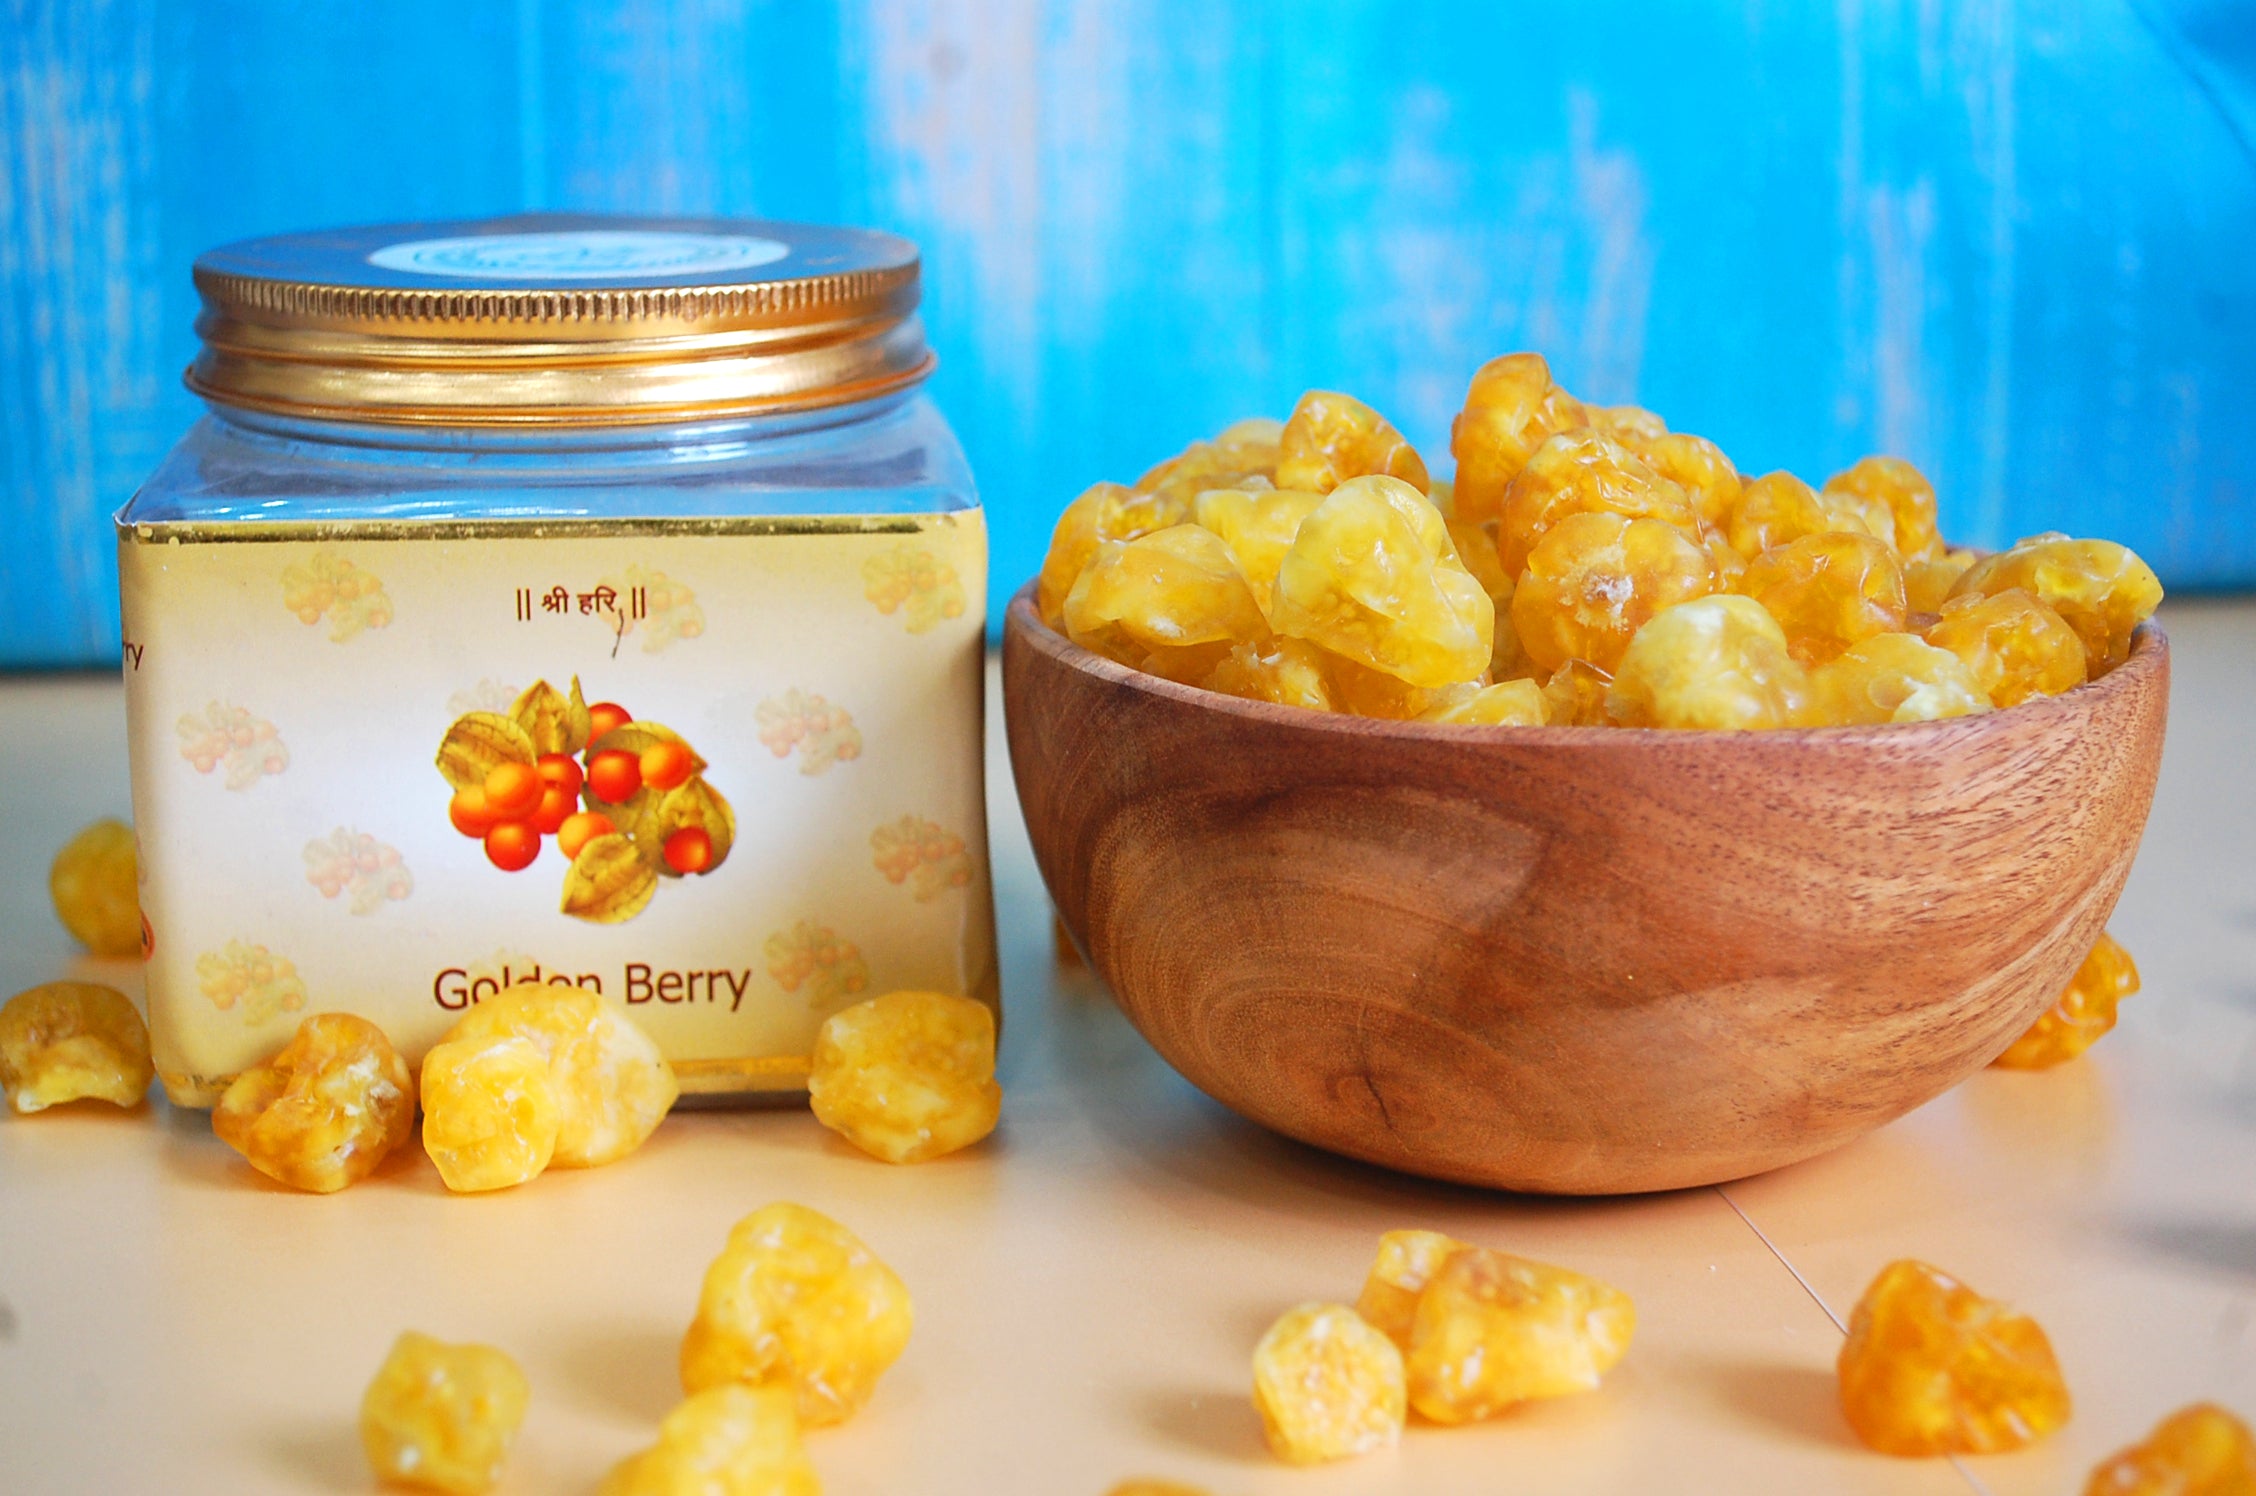 Dried Golden Berry Quality 250 GM